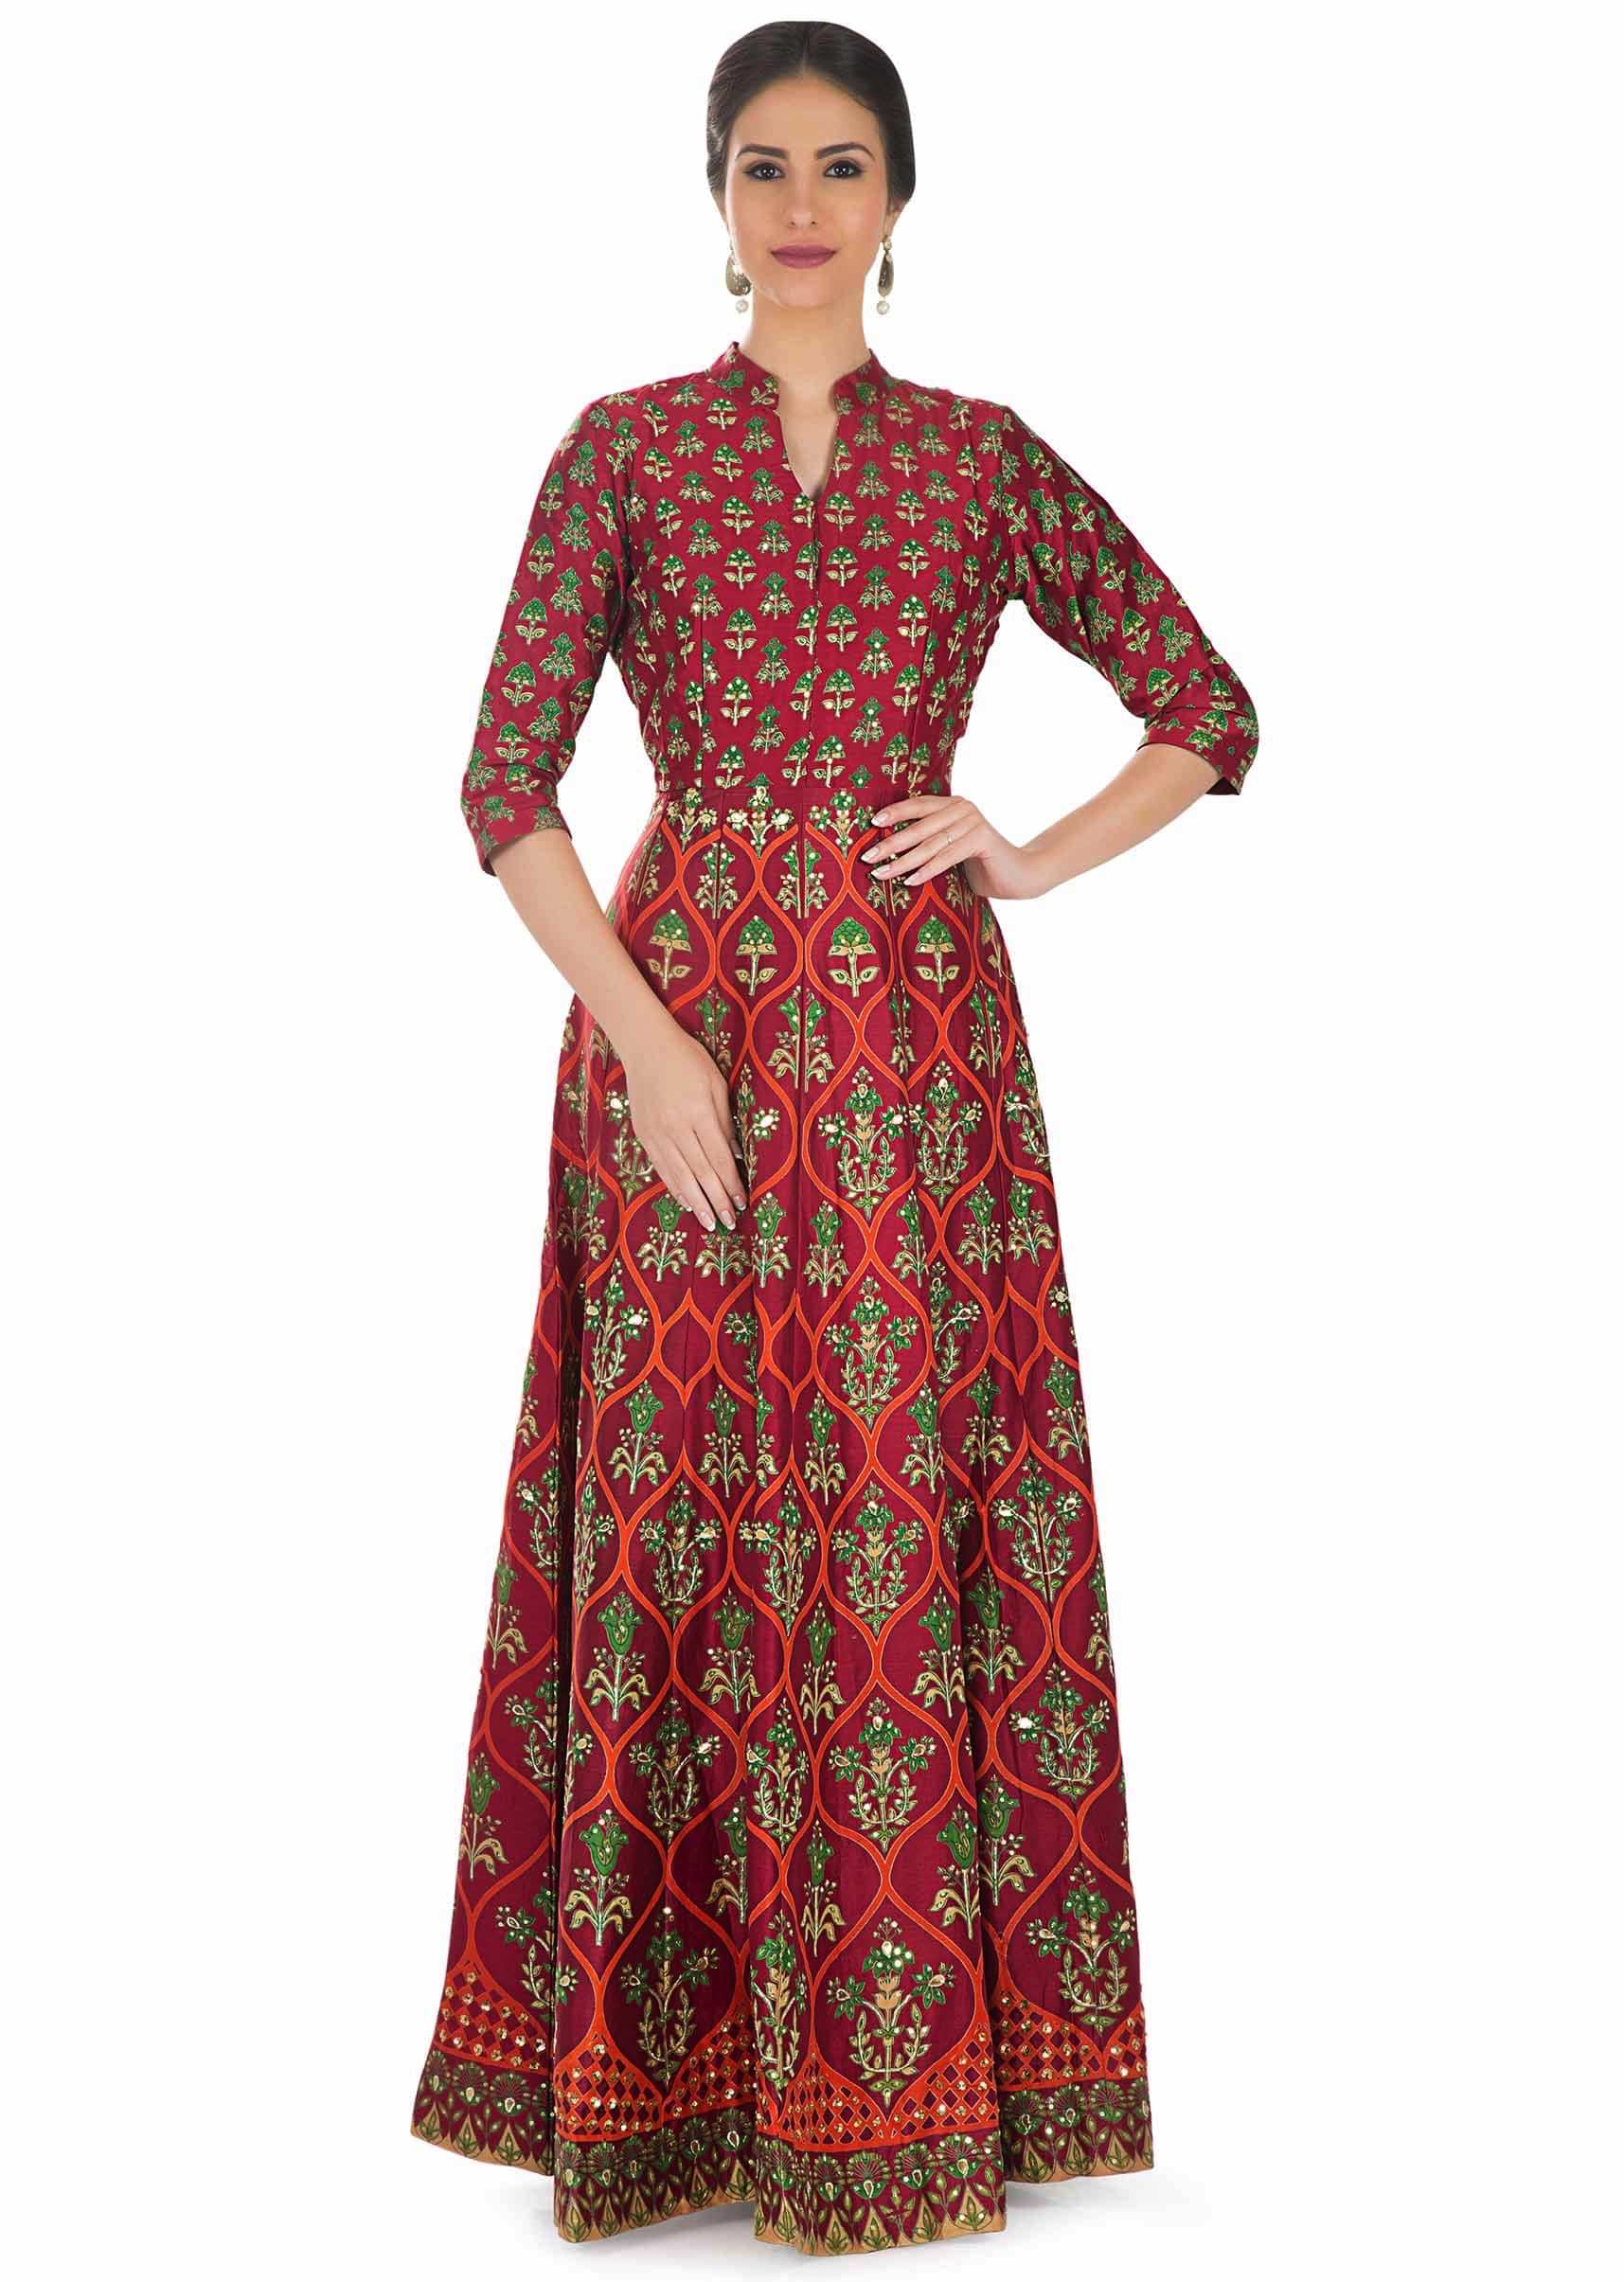 Maroon Cotton Silk Dress Featuring Floral Prints Embellished with Sequins and Gotta Patch only on Kalki